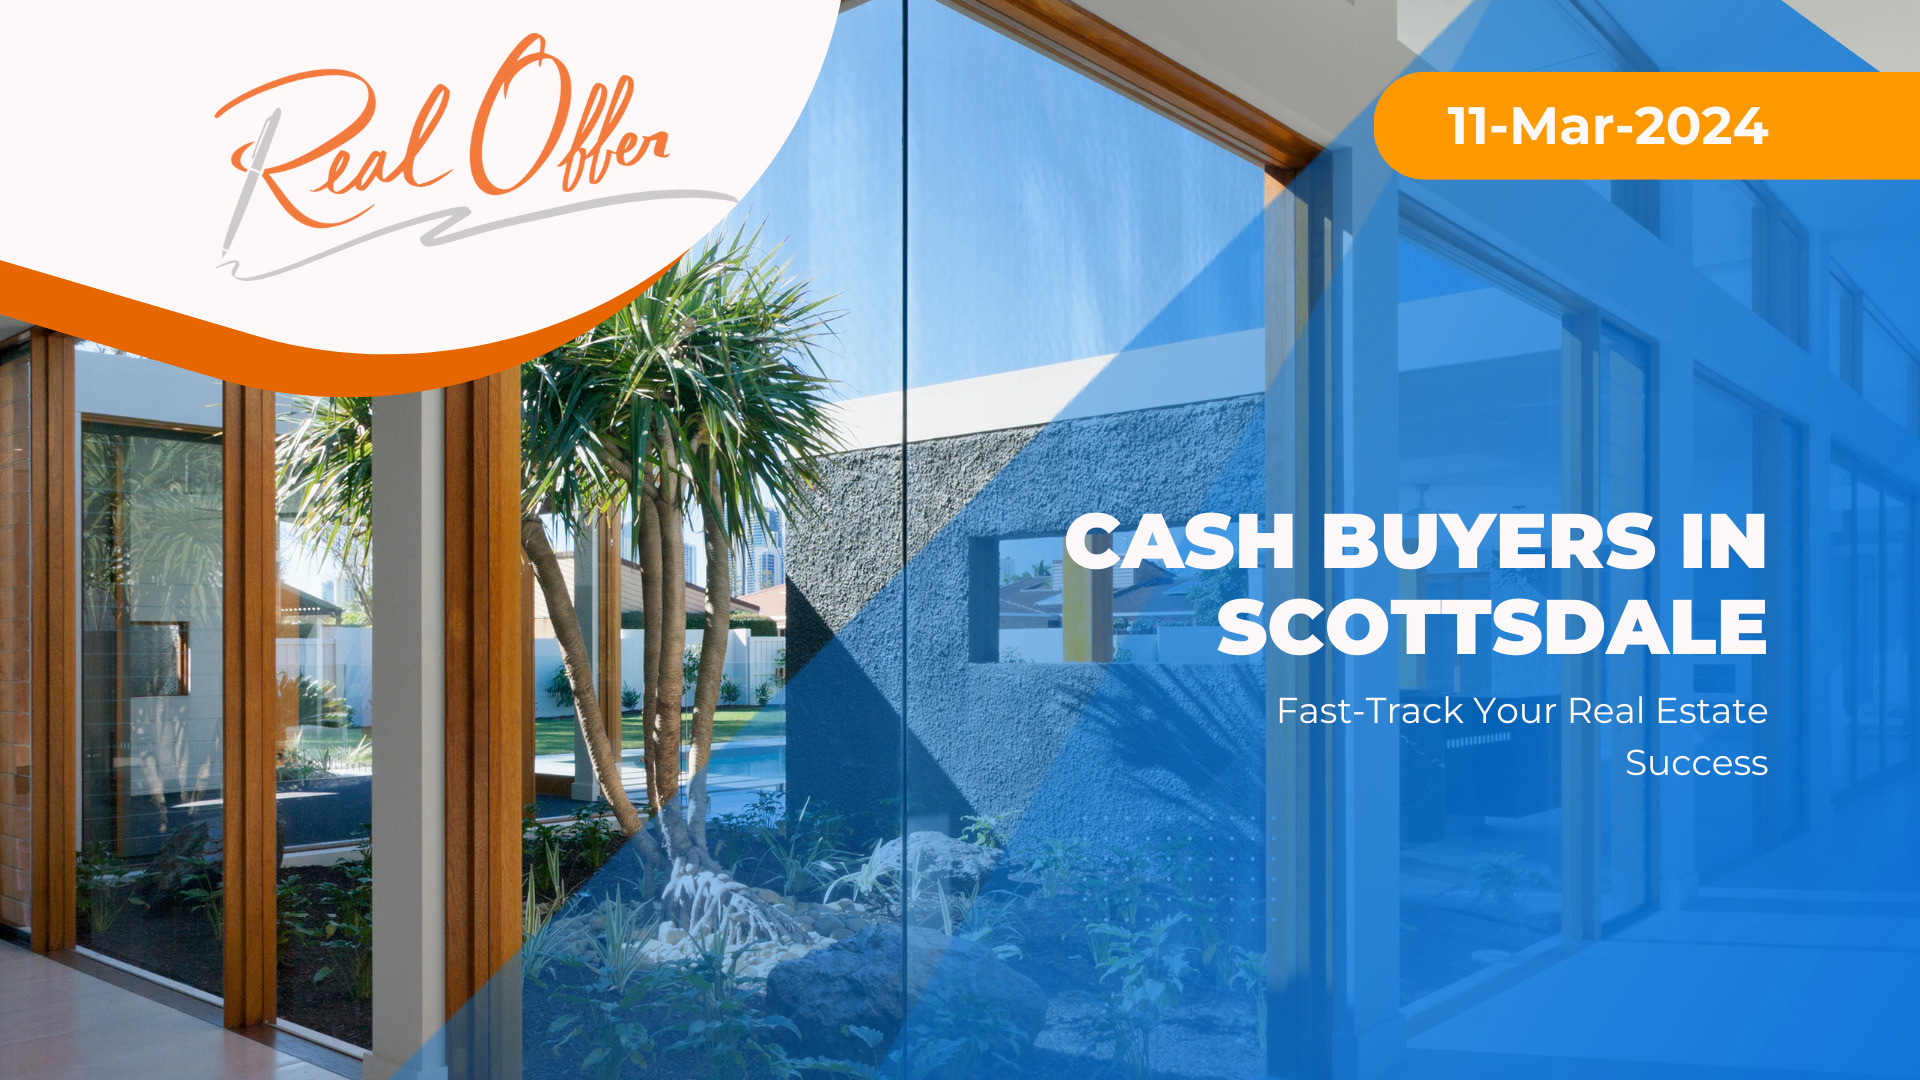 Cash Buyers Scottsdale: Fast-Track Your Real Estate Success